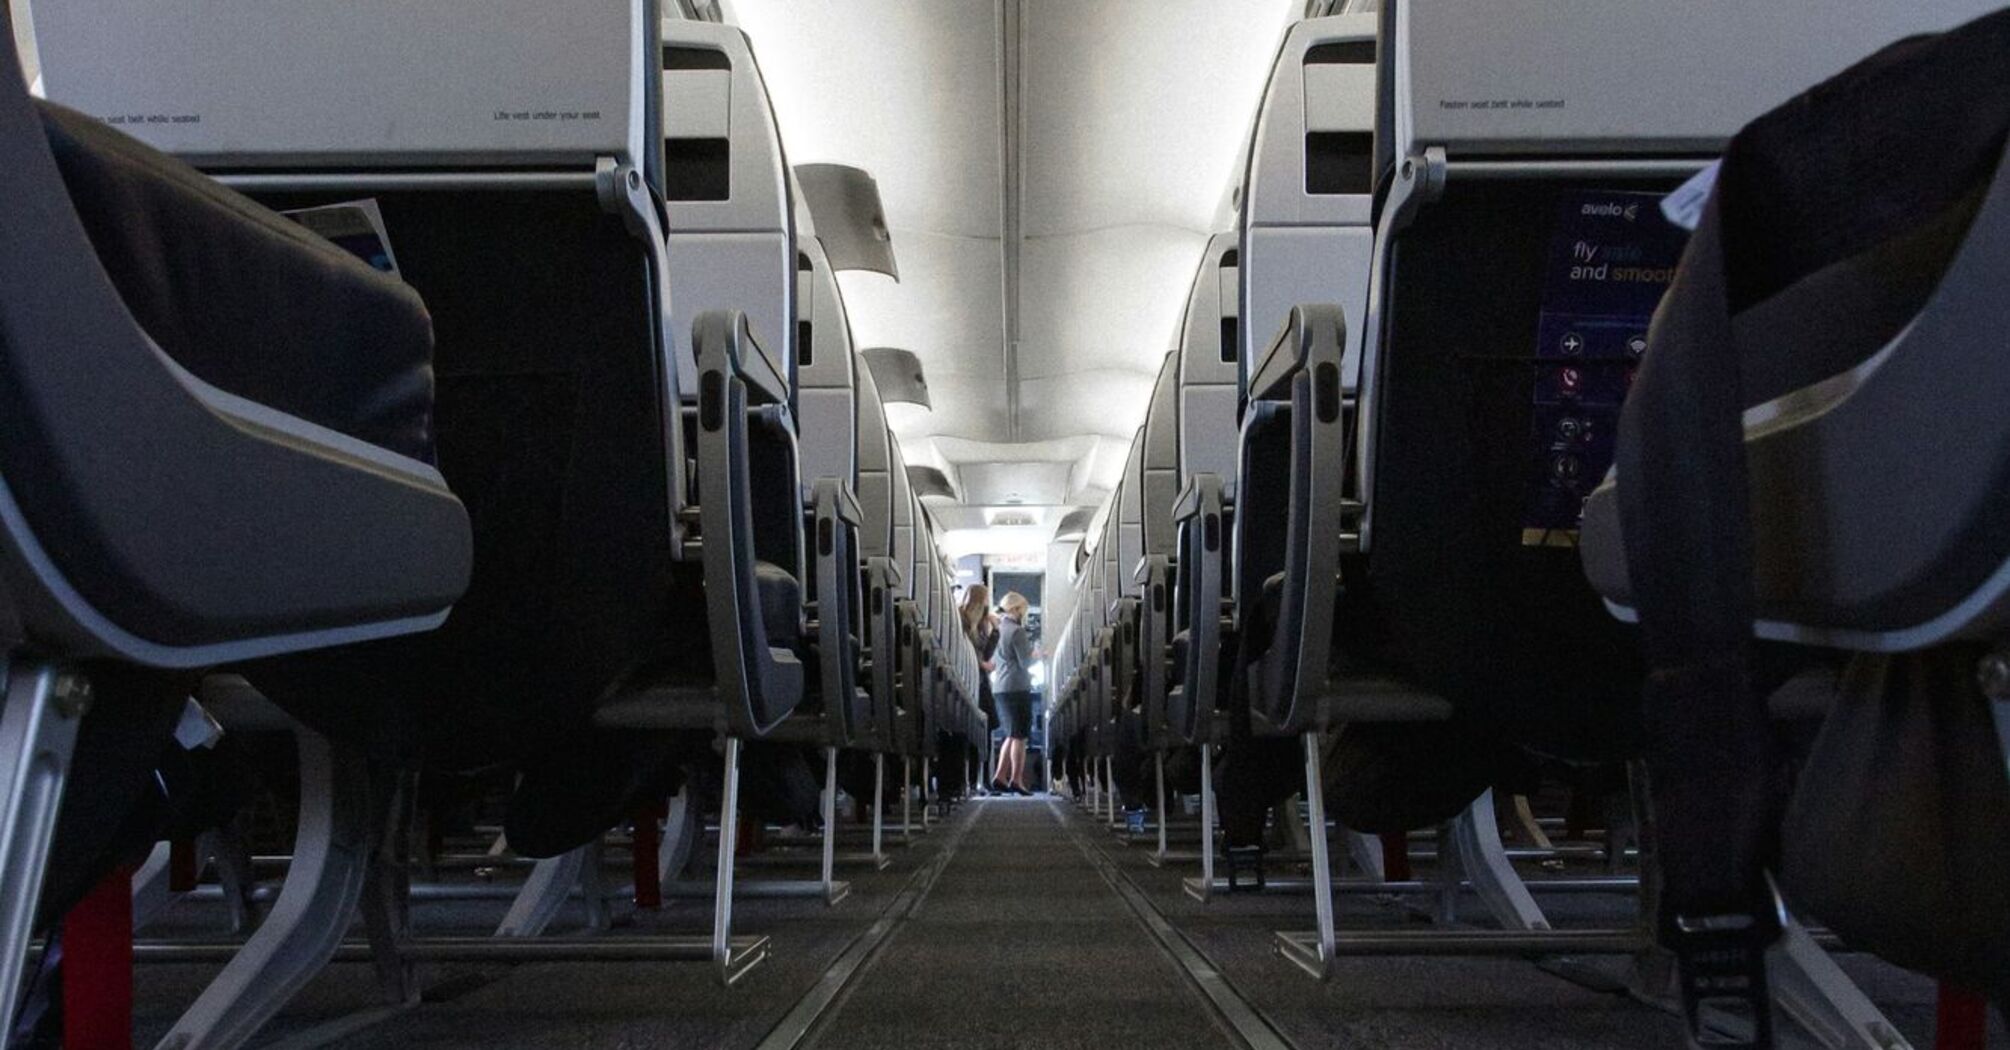 A view down the aisle of an airplane, showing rows of seats on either side